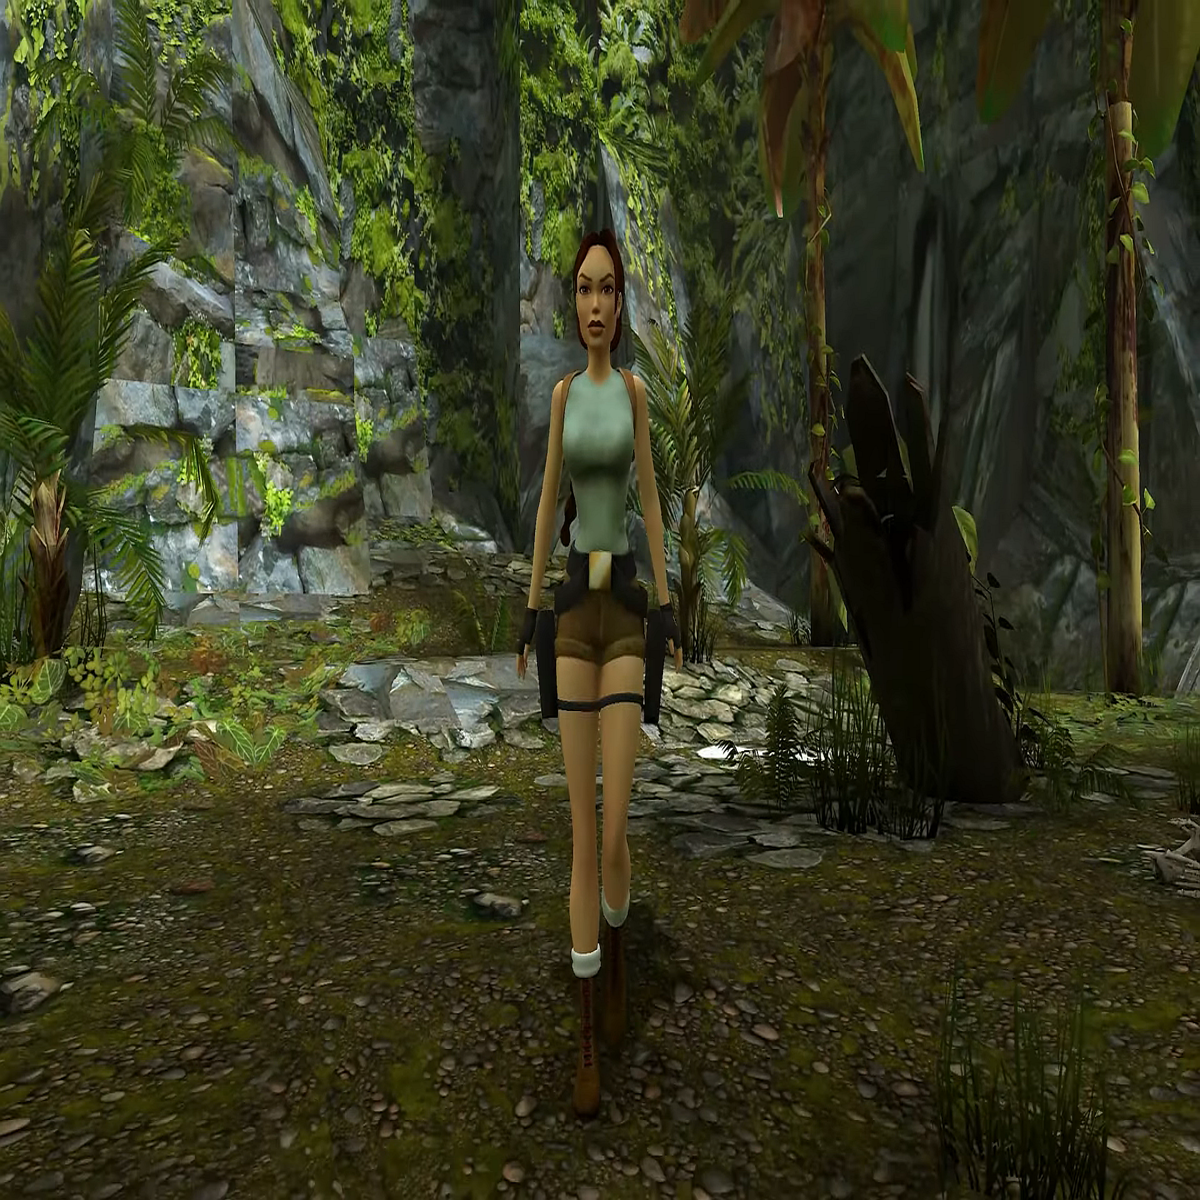 Tomb Raider I-III Remastered from Aspyr - for real this time